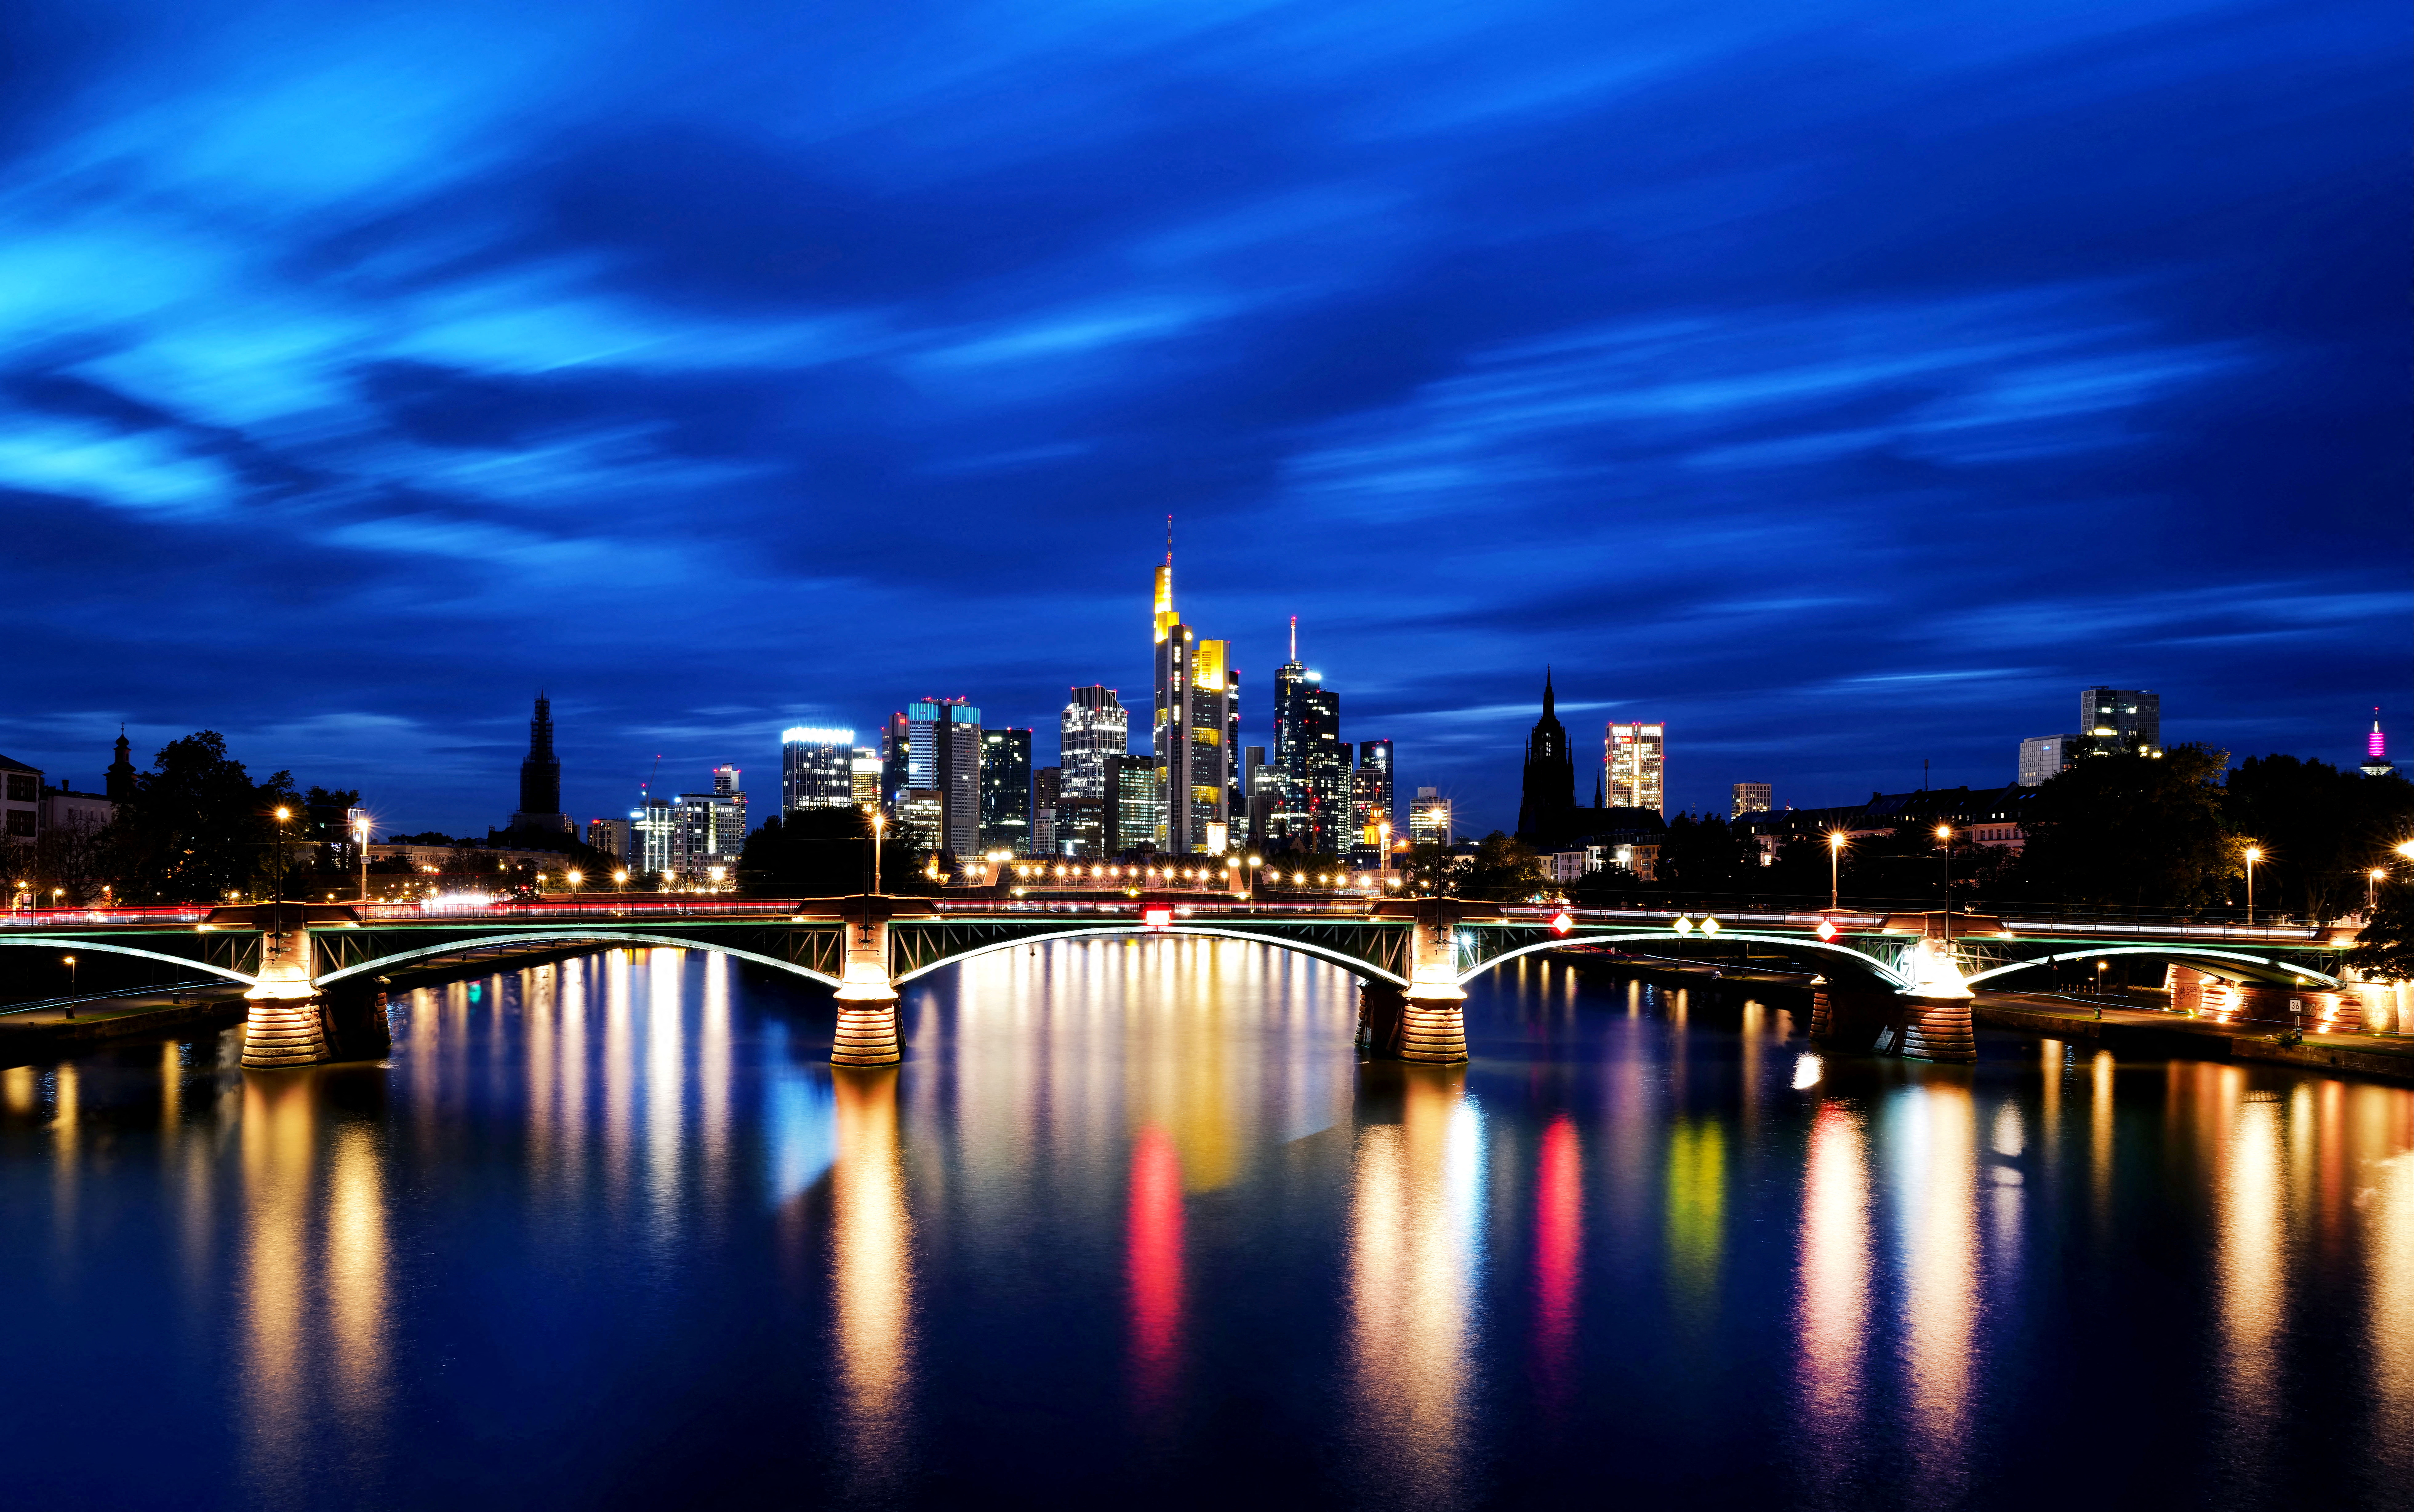 The skyline with the banking district is photographed in Frankfurt